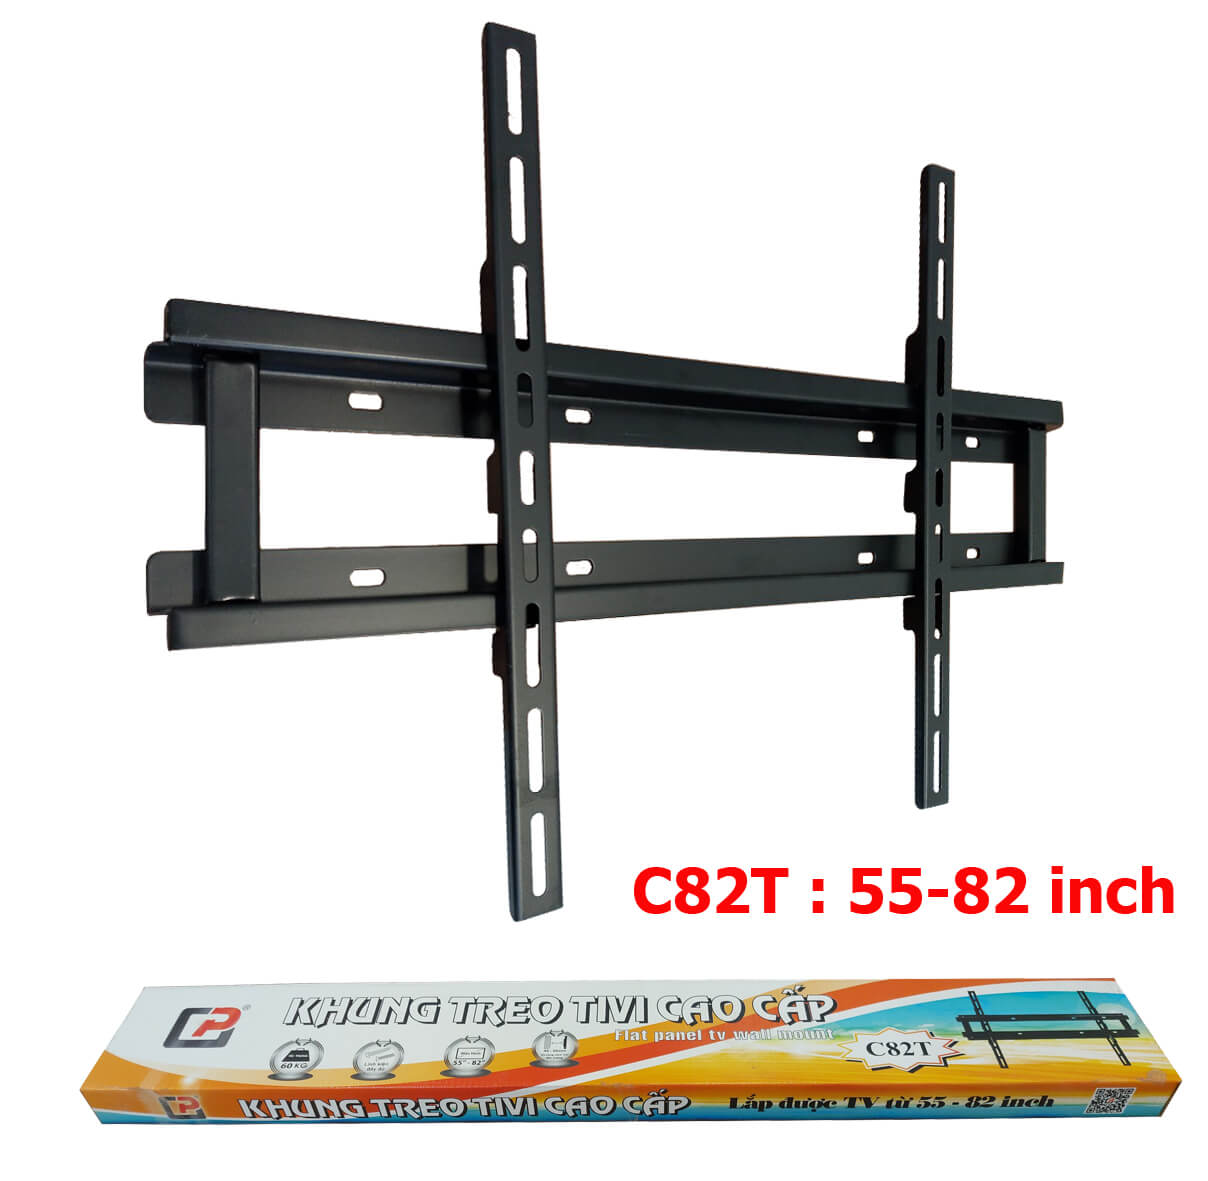 gia-treo-tivi-ap-tuong-tv-55-82inch-_c82t-canh-phong_2